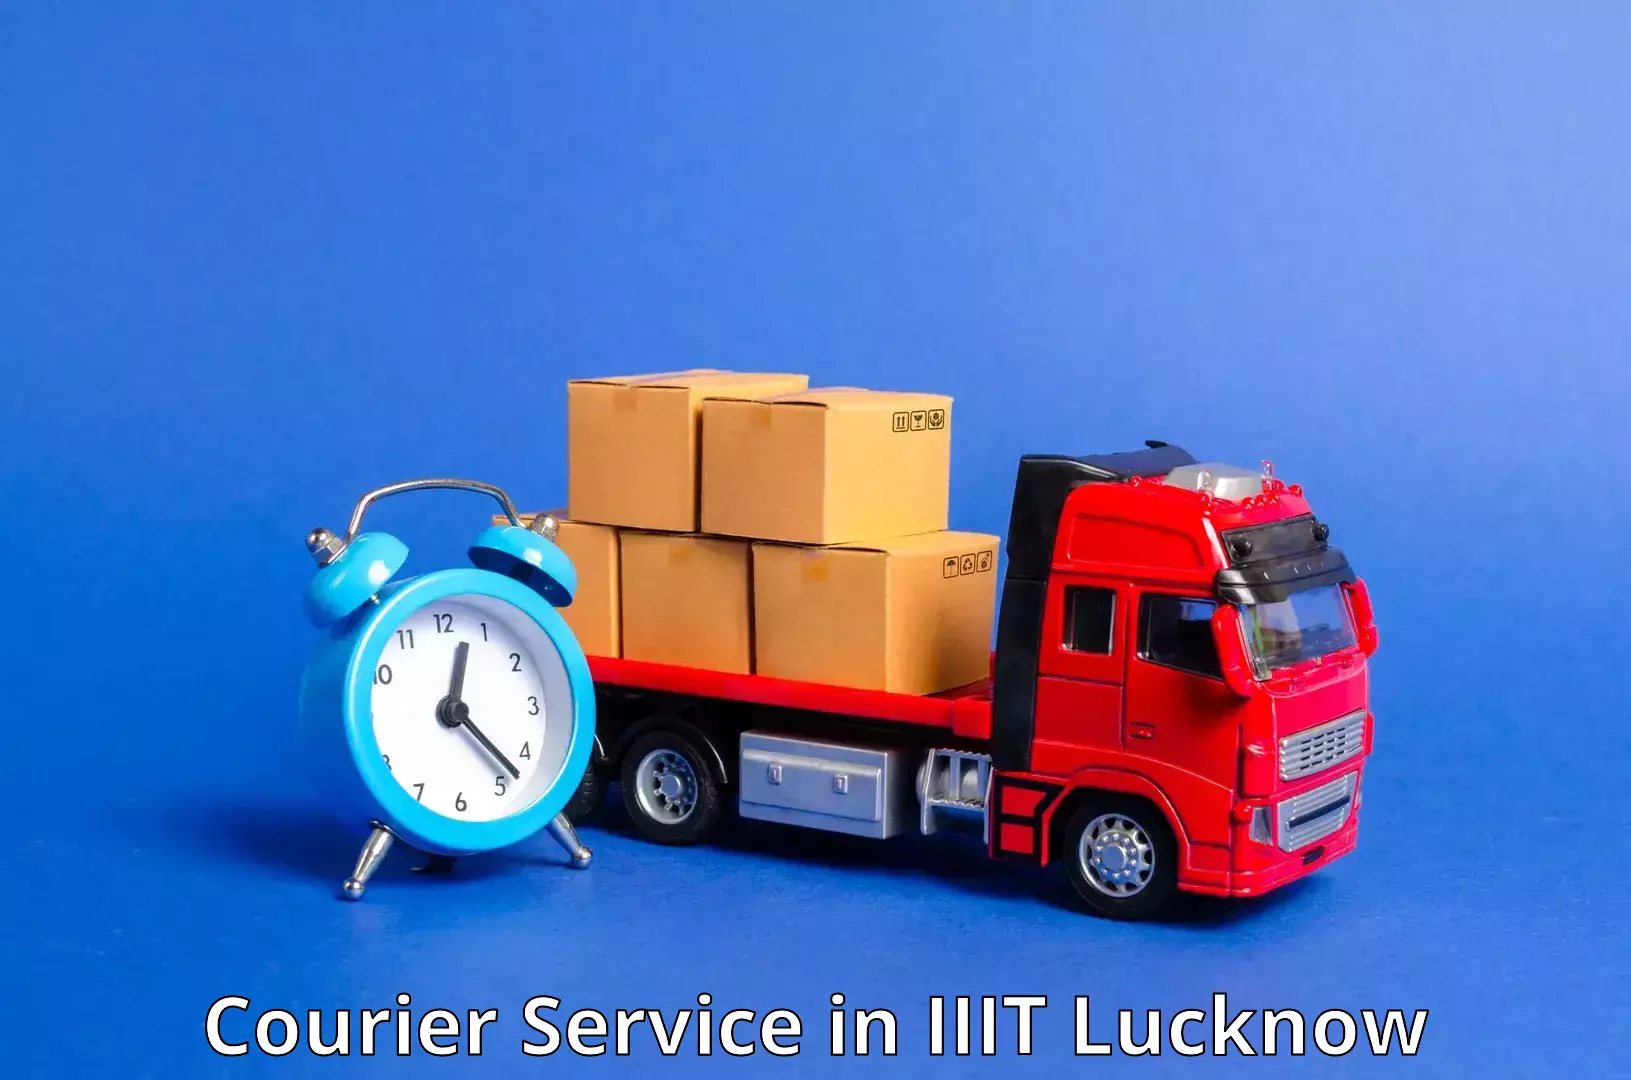 Quick booking process in IIIT Lucknow